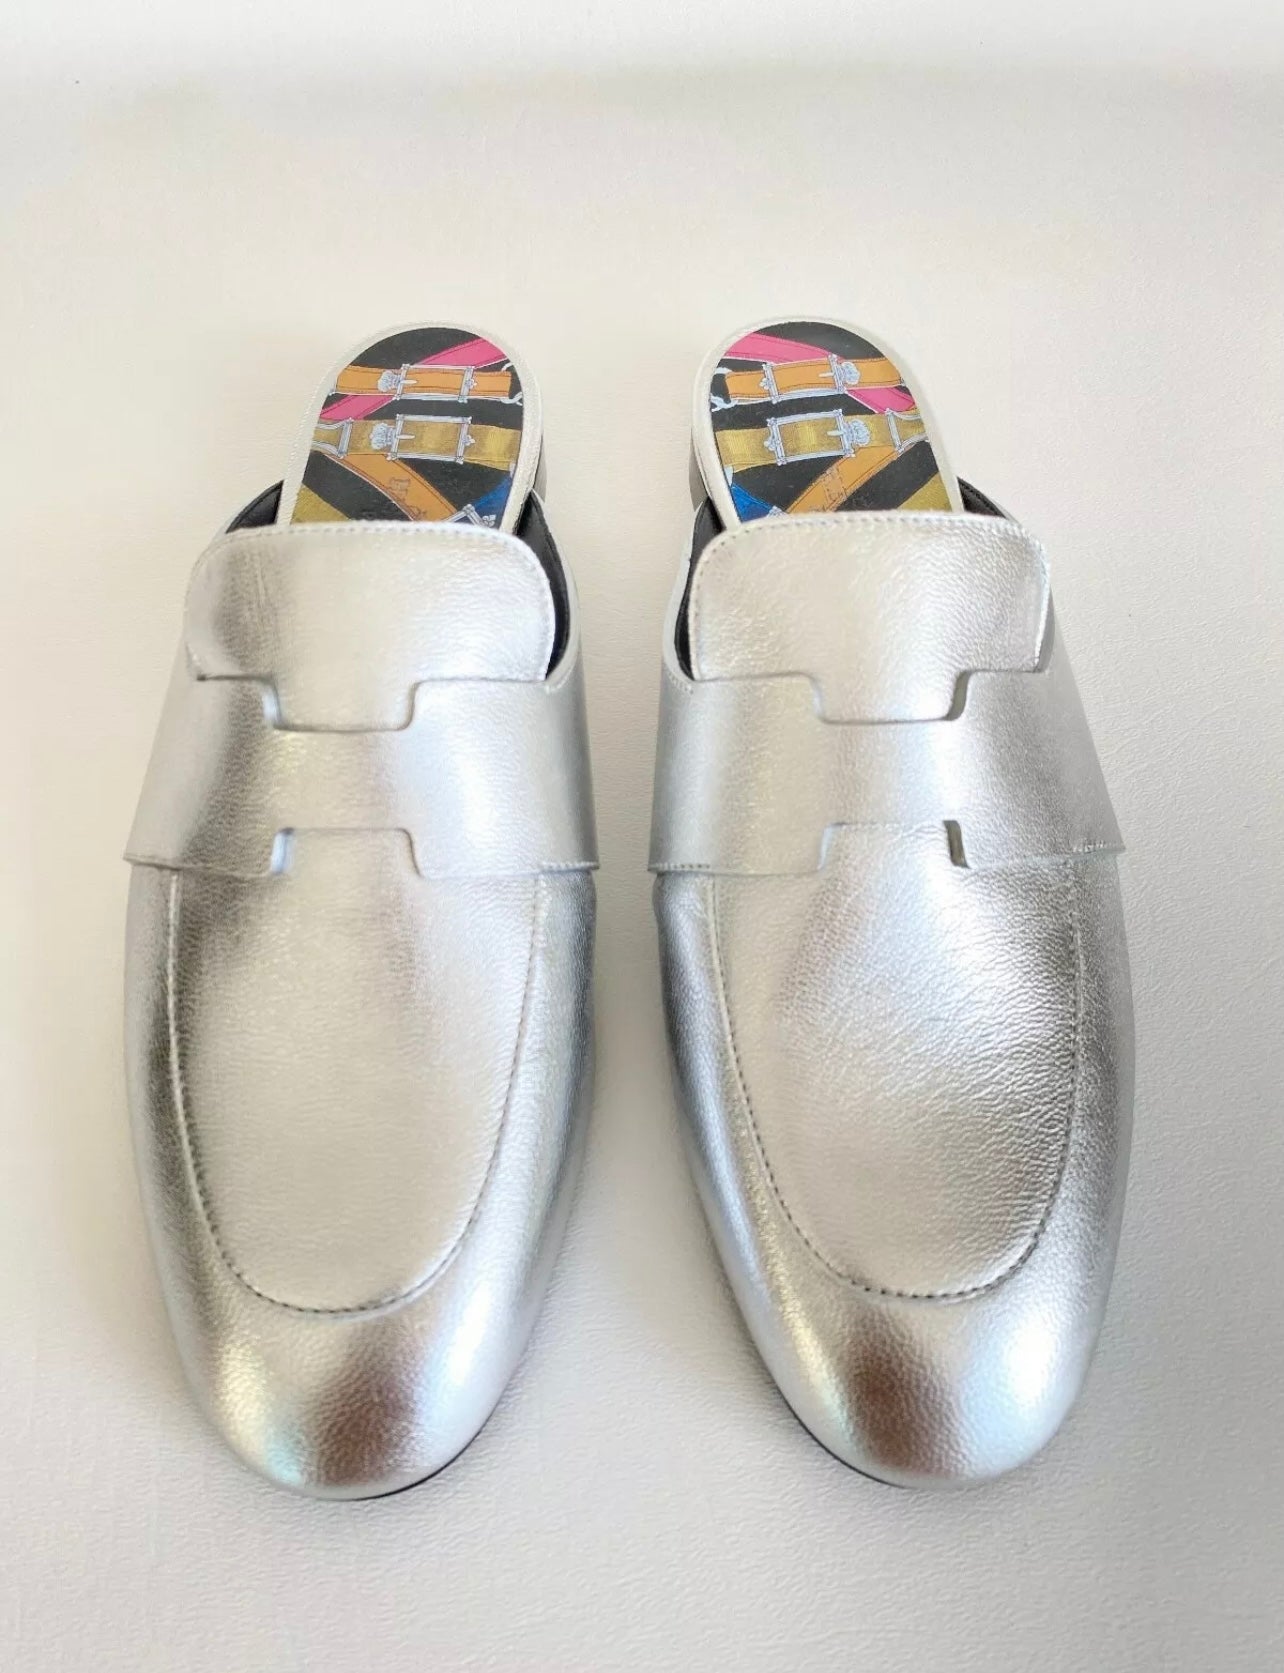 HERMES H CATENA SILVER LEATHER MULES FLIP FLOPS SHOES FLAT SLIDES